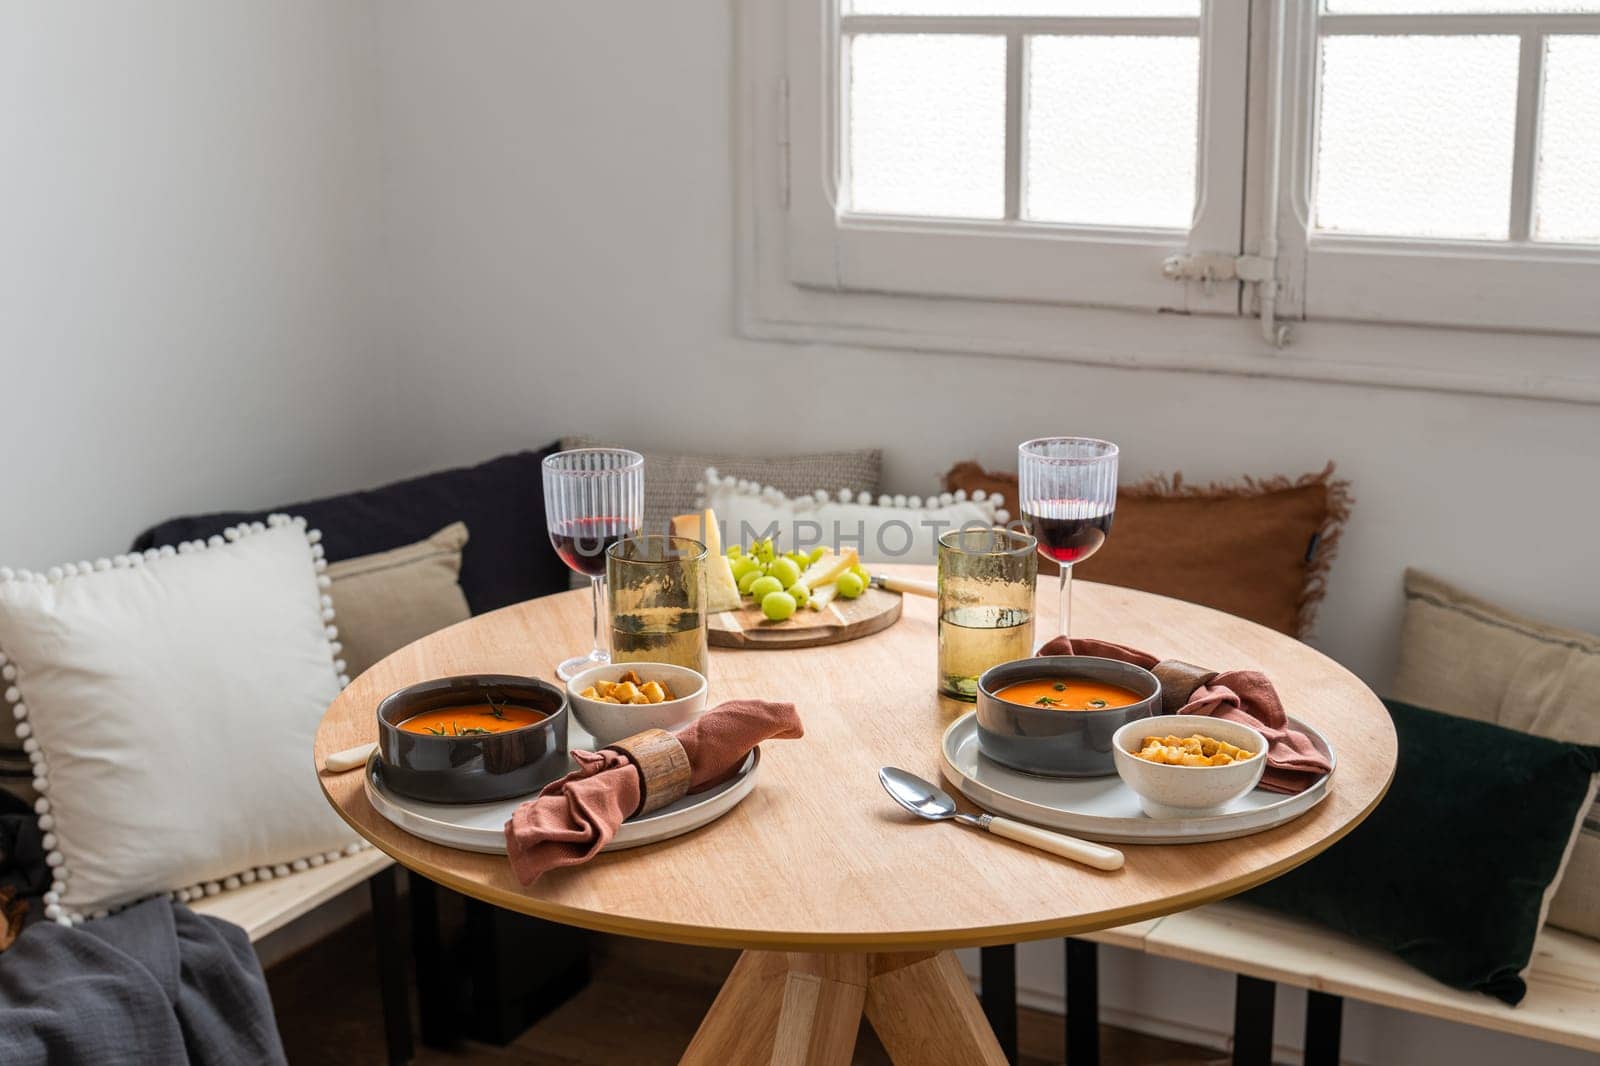 A traditional table is set for a meal in a domestic room. It features food, drink, furniture, and traditional Spanish gazpacho.